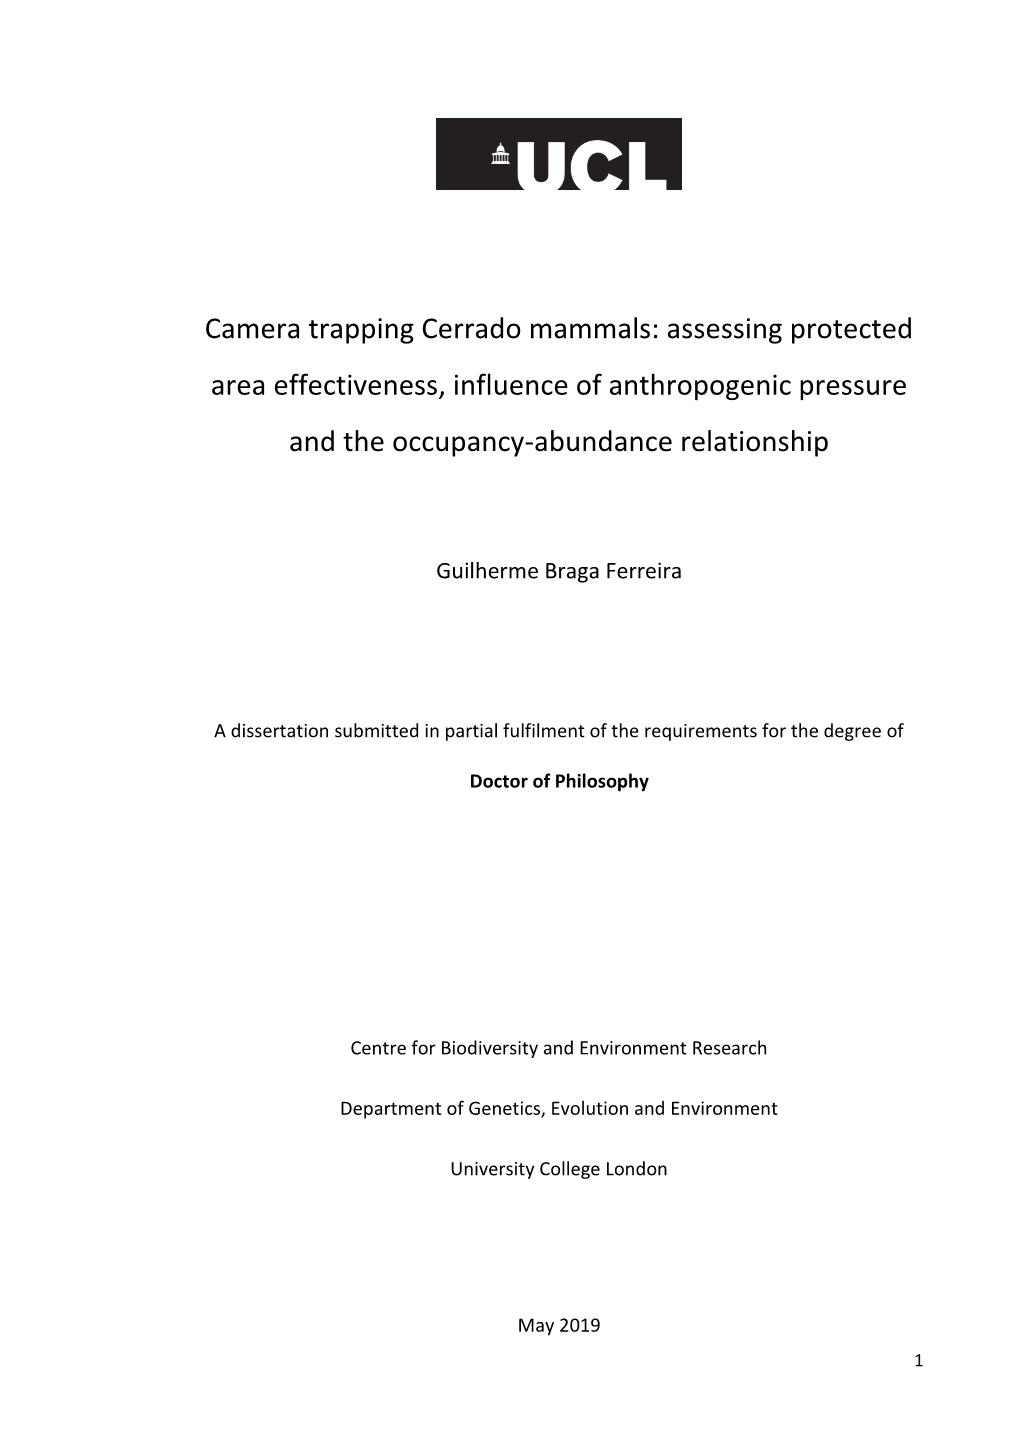 Camera Trapping Cerrado Mammals: Assessing Protected Area Effectiveness, Influence of Anthropogenic Pressure and the Occupancy-Abundance Relationship